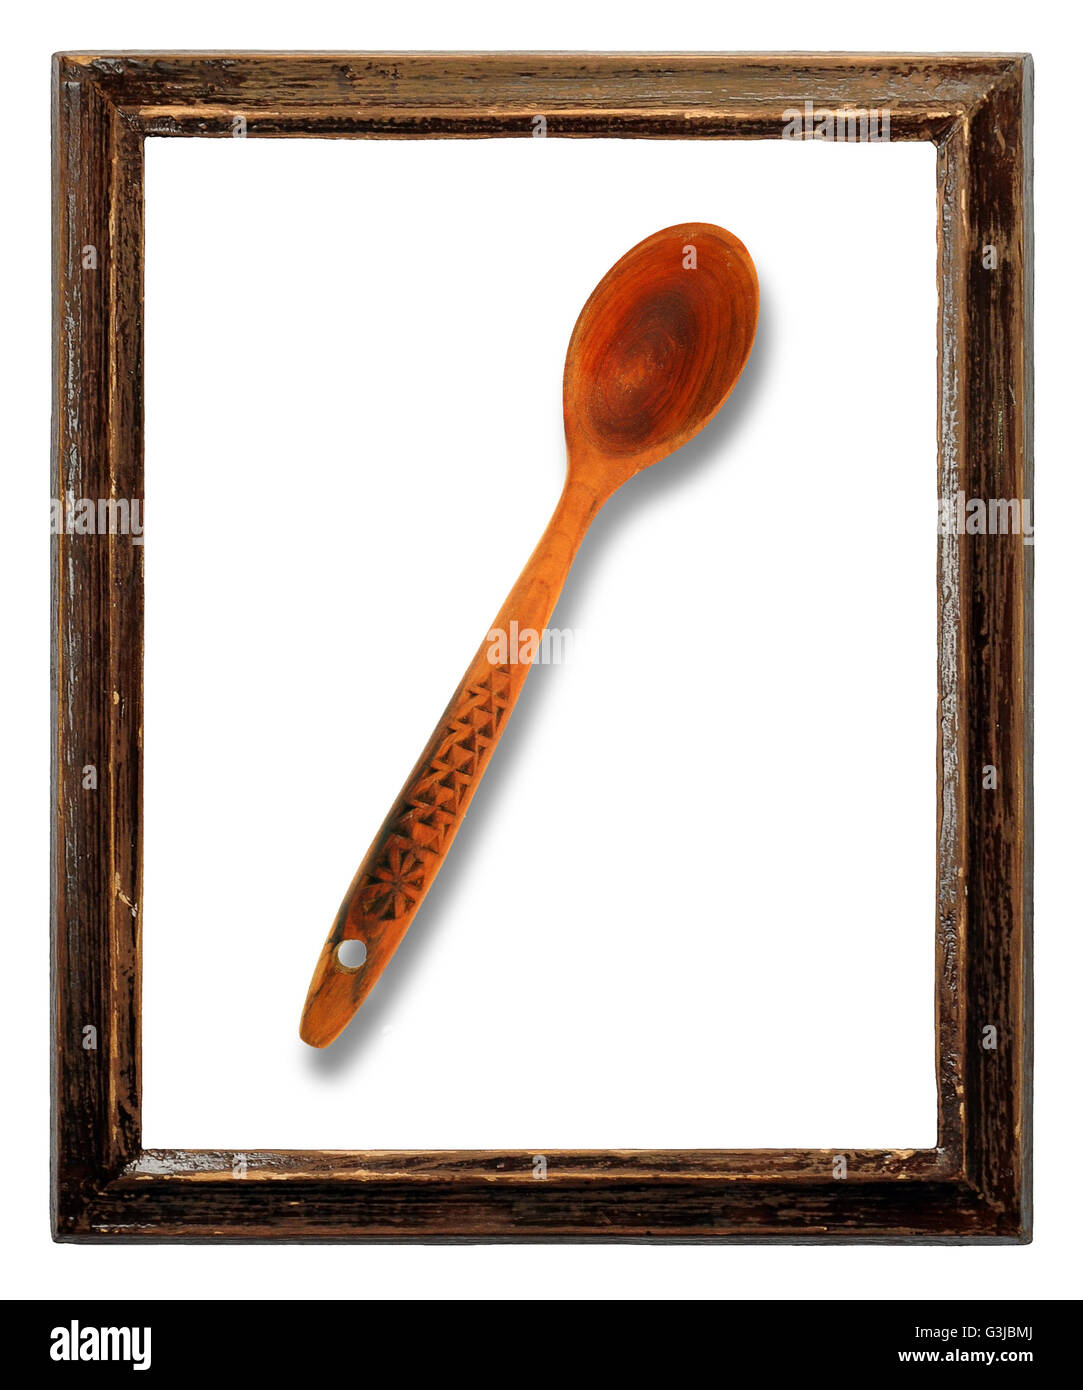 wooden spoon in old wooden frame isolated Stock Photo